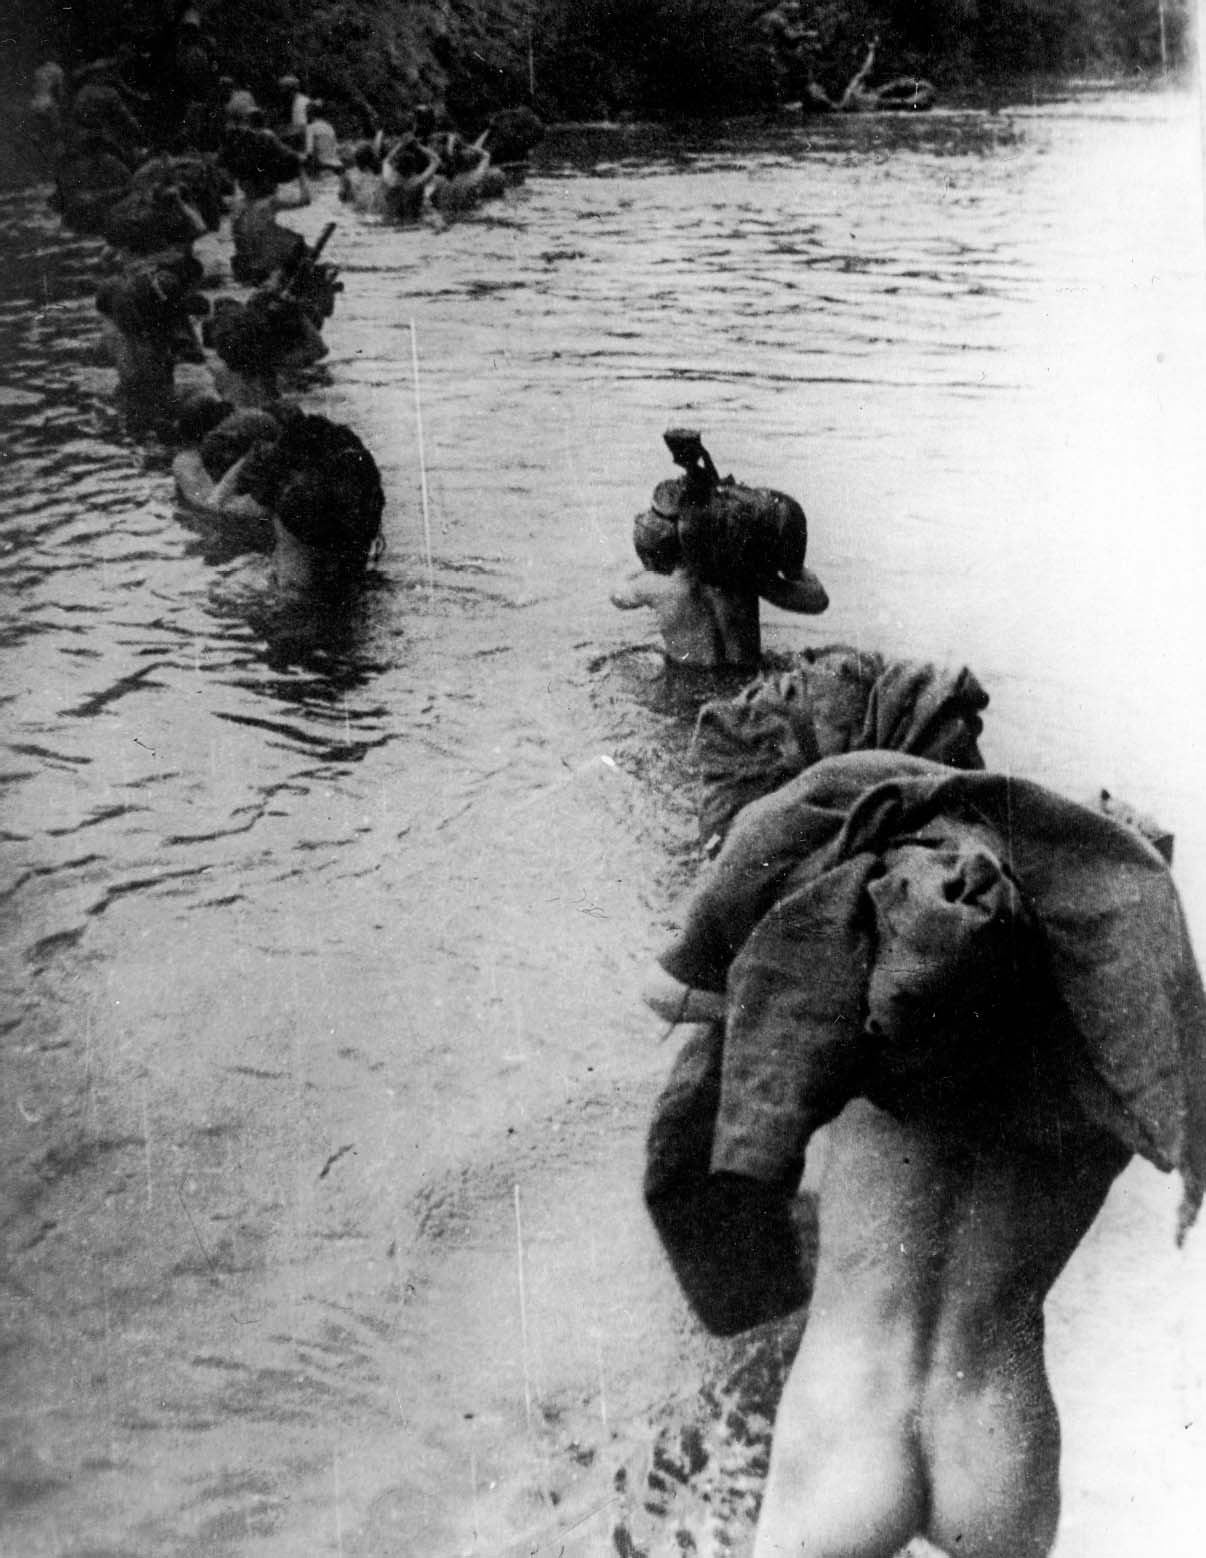 Soviet Red Army soldier cross the River Spree in the Battle of Berlin